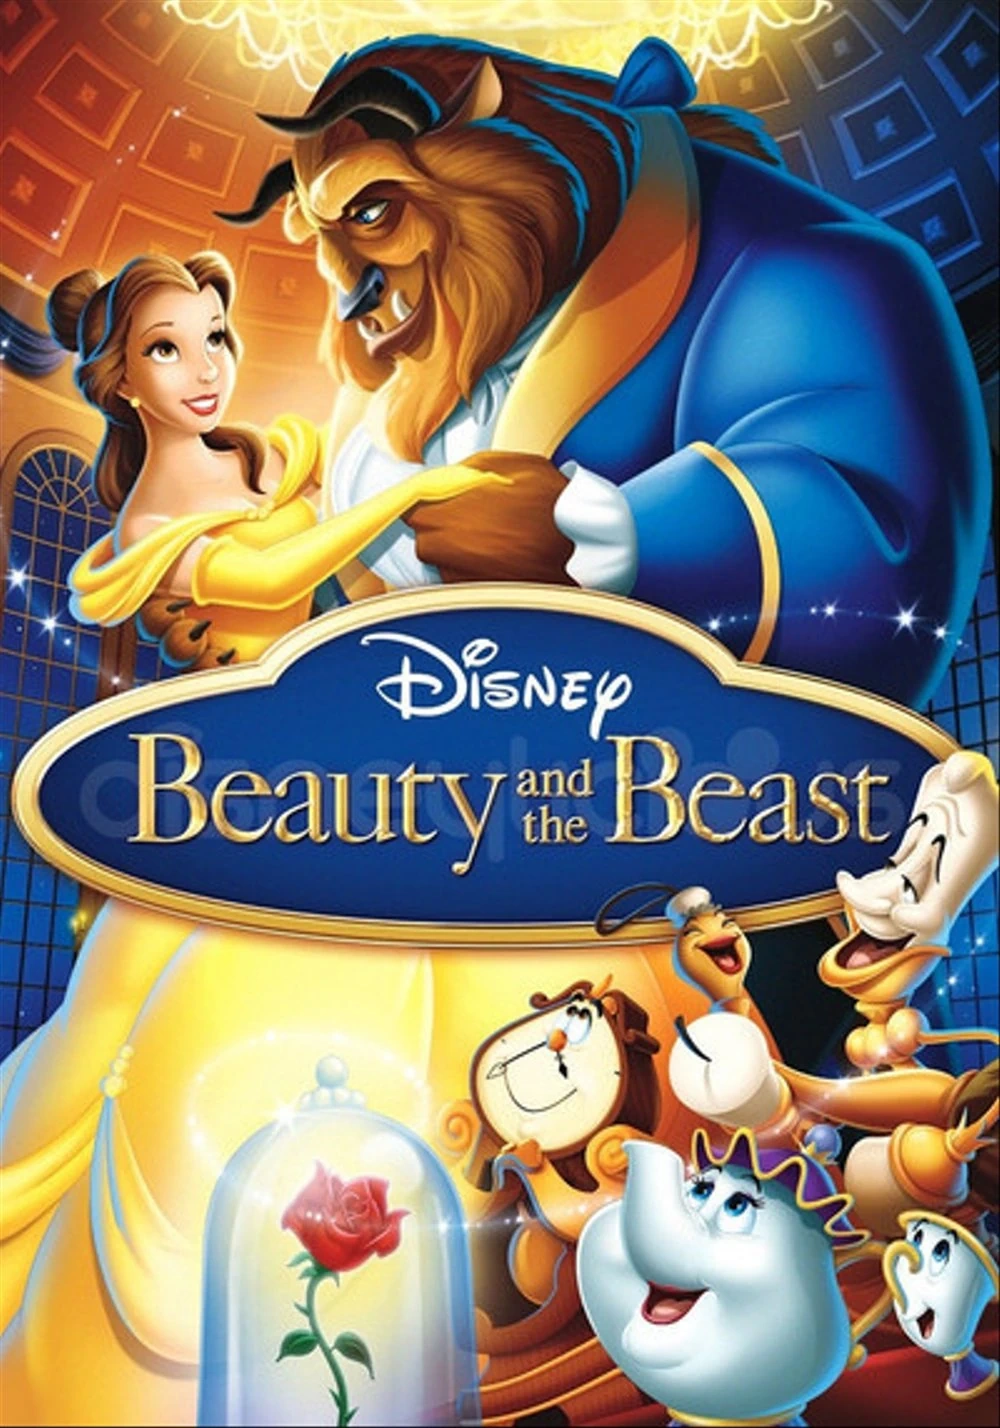 'Beauty and the Beast' (1991): Gary Trousdale co-directed with Kirk Wise 